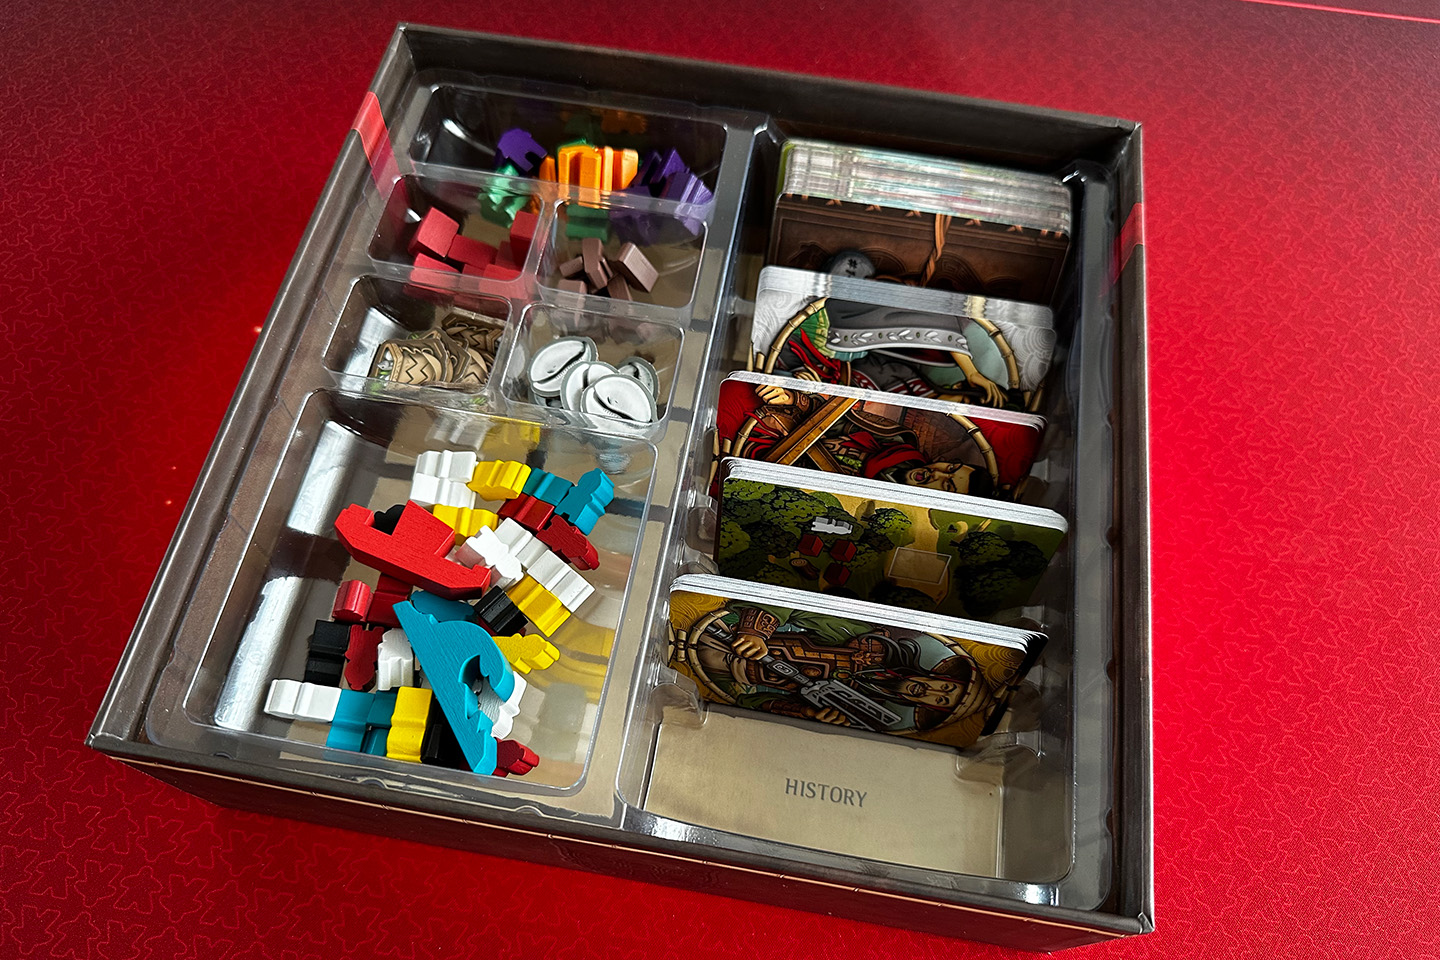 The functional insert makes setup and clean-up a breeze!